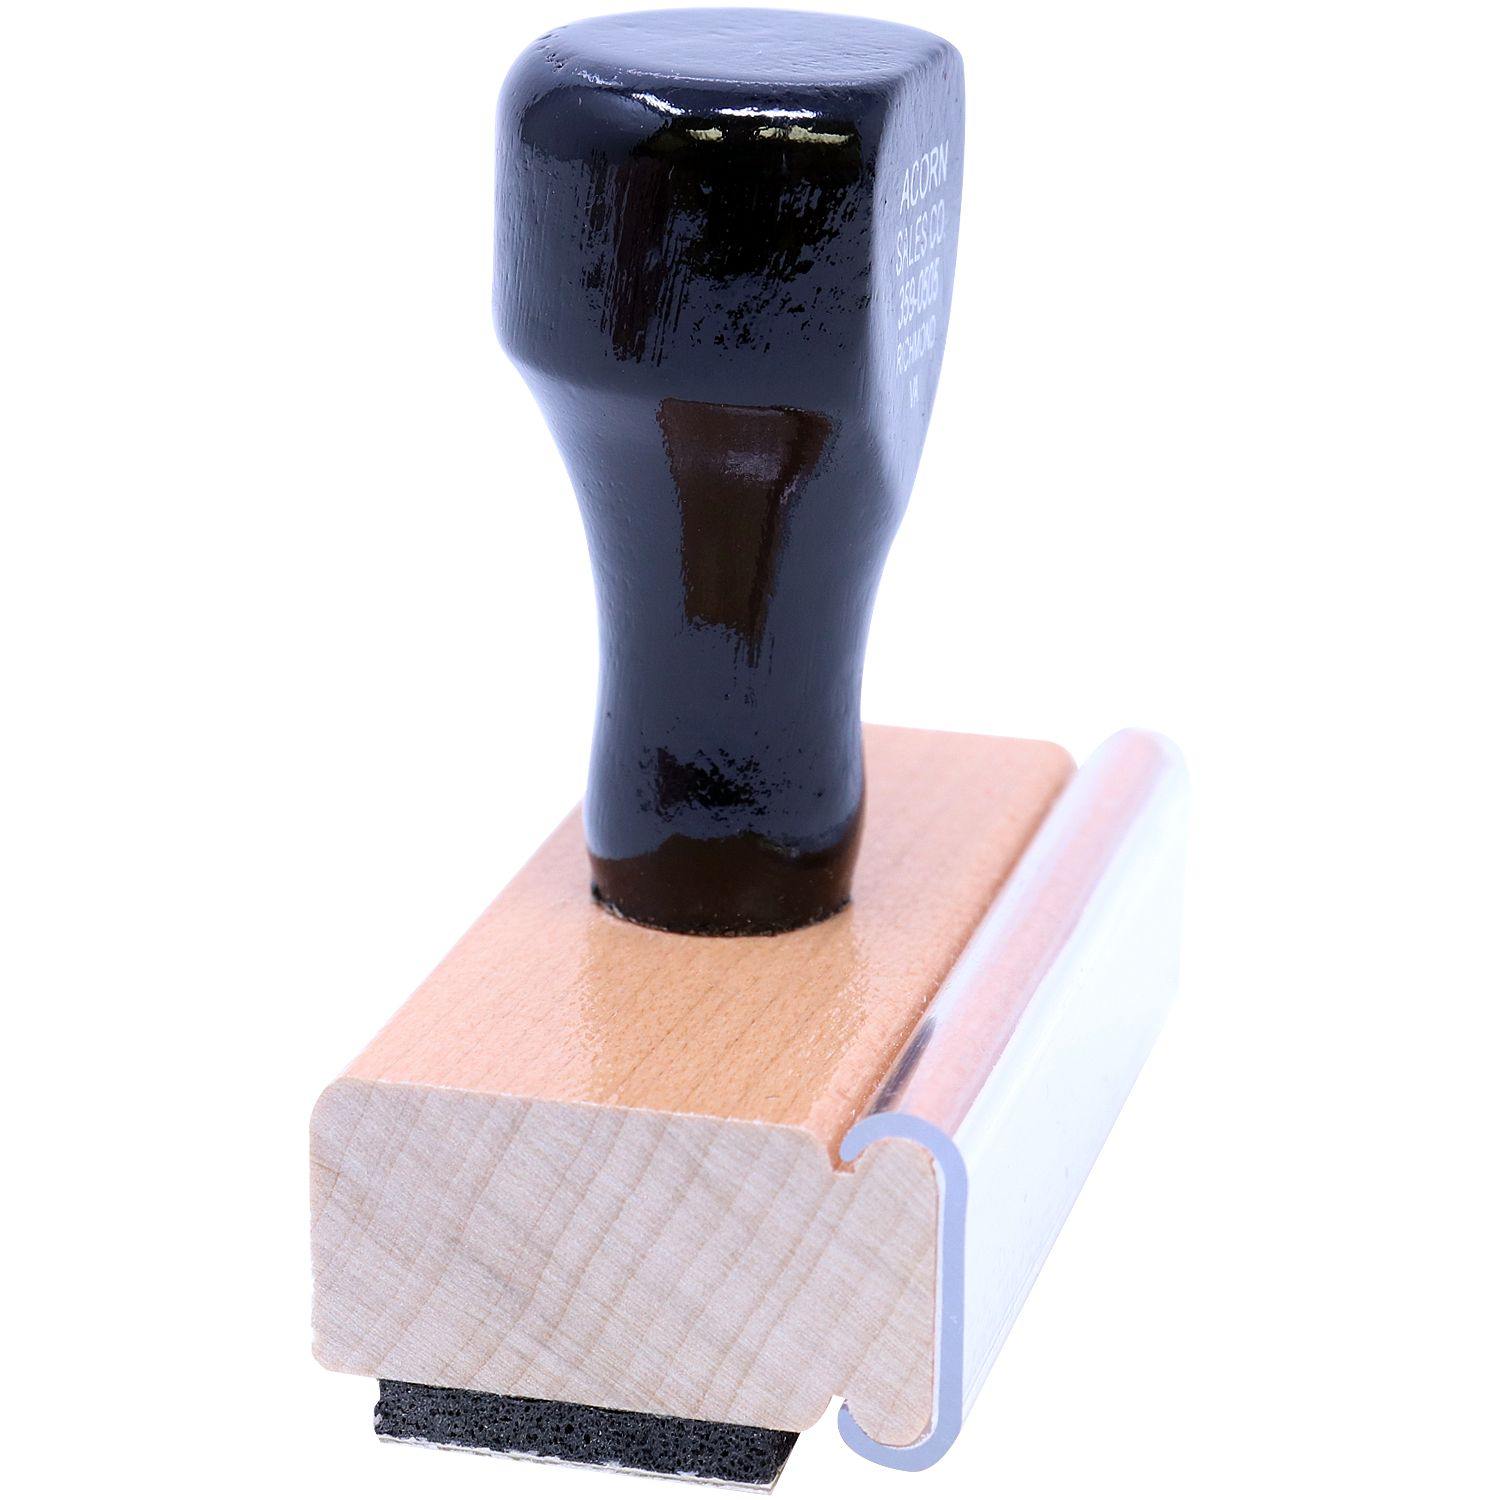 No Such Number Rubber Stamp - Engineer Seal Stamps - Brand_Acorn, Impression Size_Small, Stamp Type_Regular Stamp, Type of Use_Office, Type of Use_Postal & Mailing